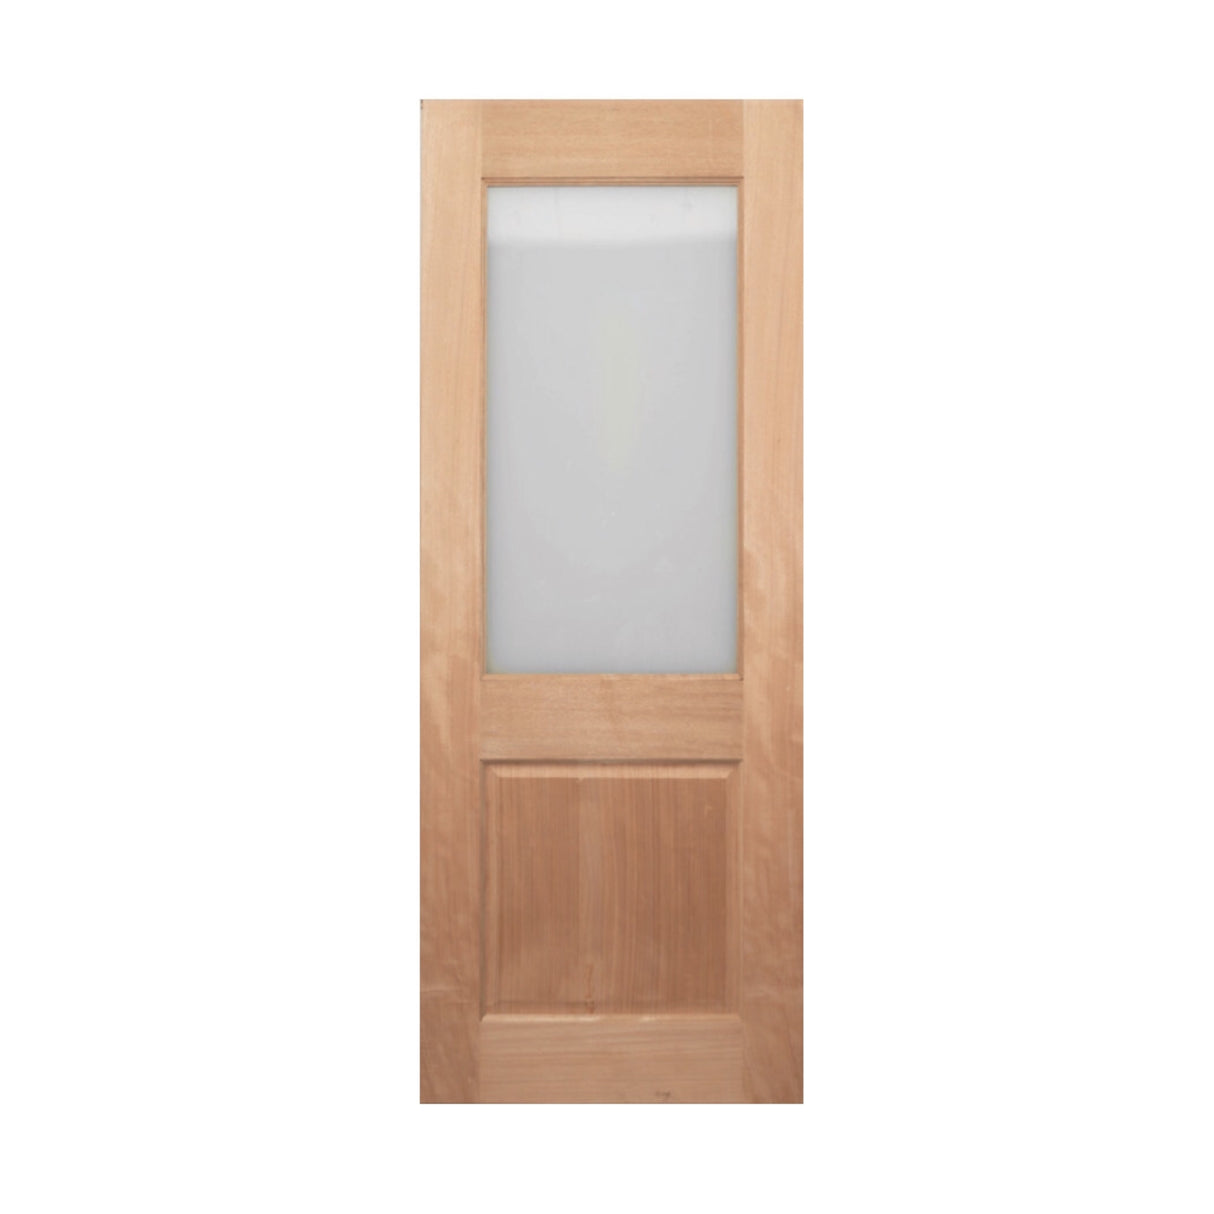 2PG - 2040 high options 35 - 40 mm thick doors